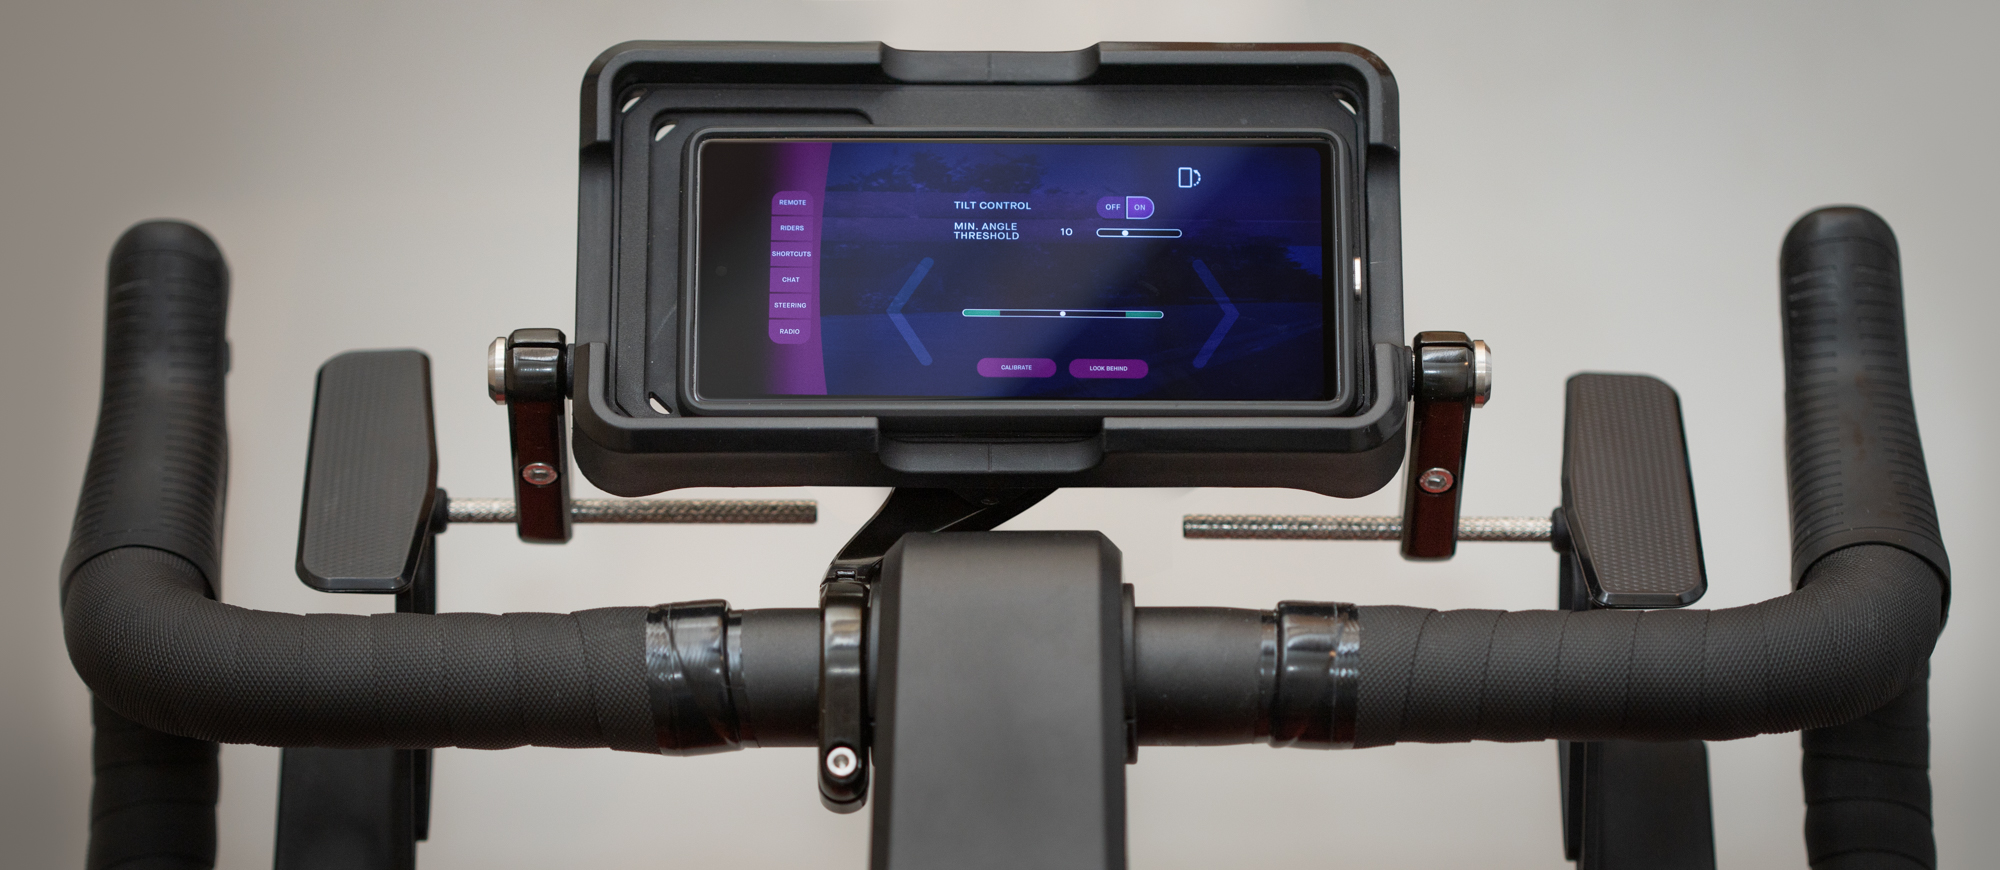 Tacx Handlebar Tablet Holder Accessory In-Depth Review